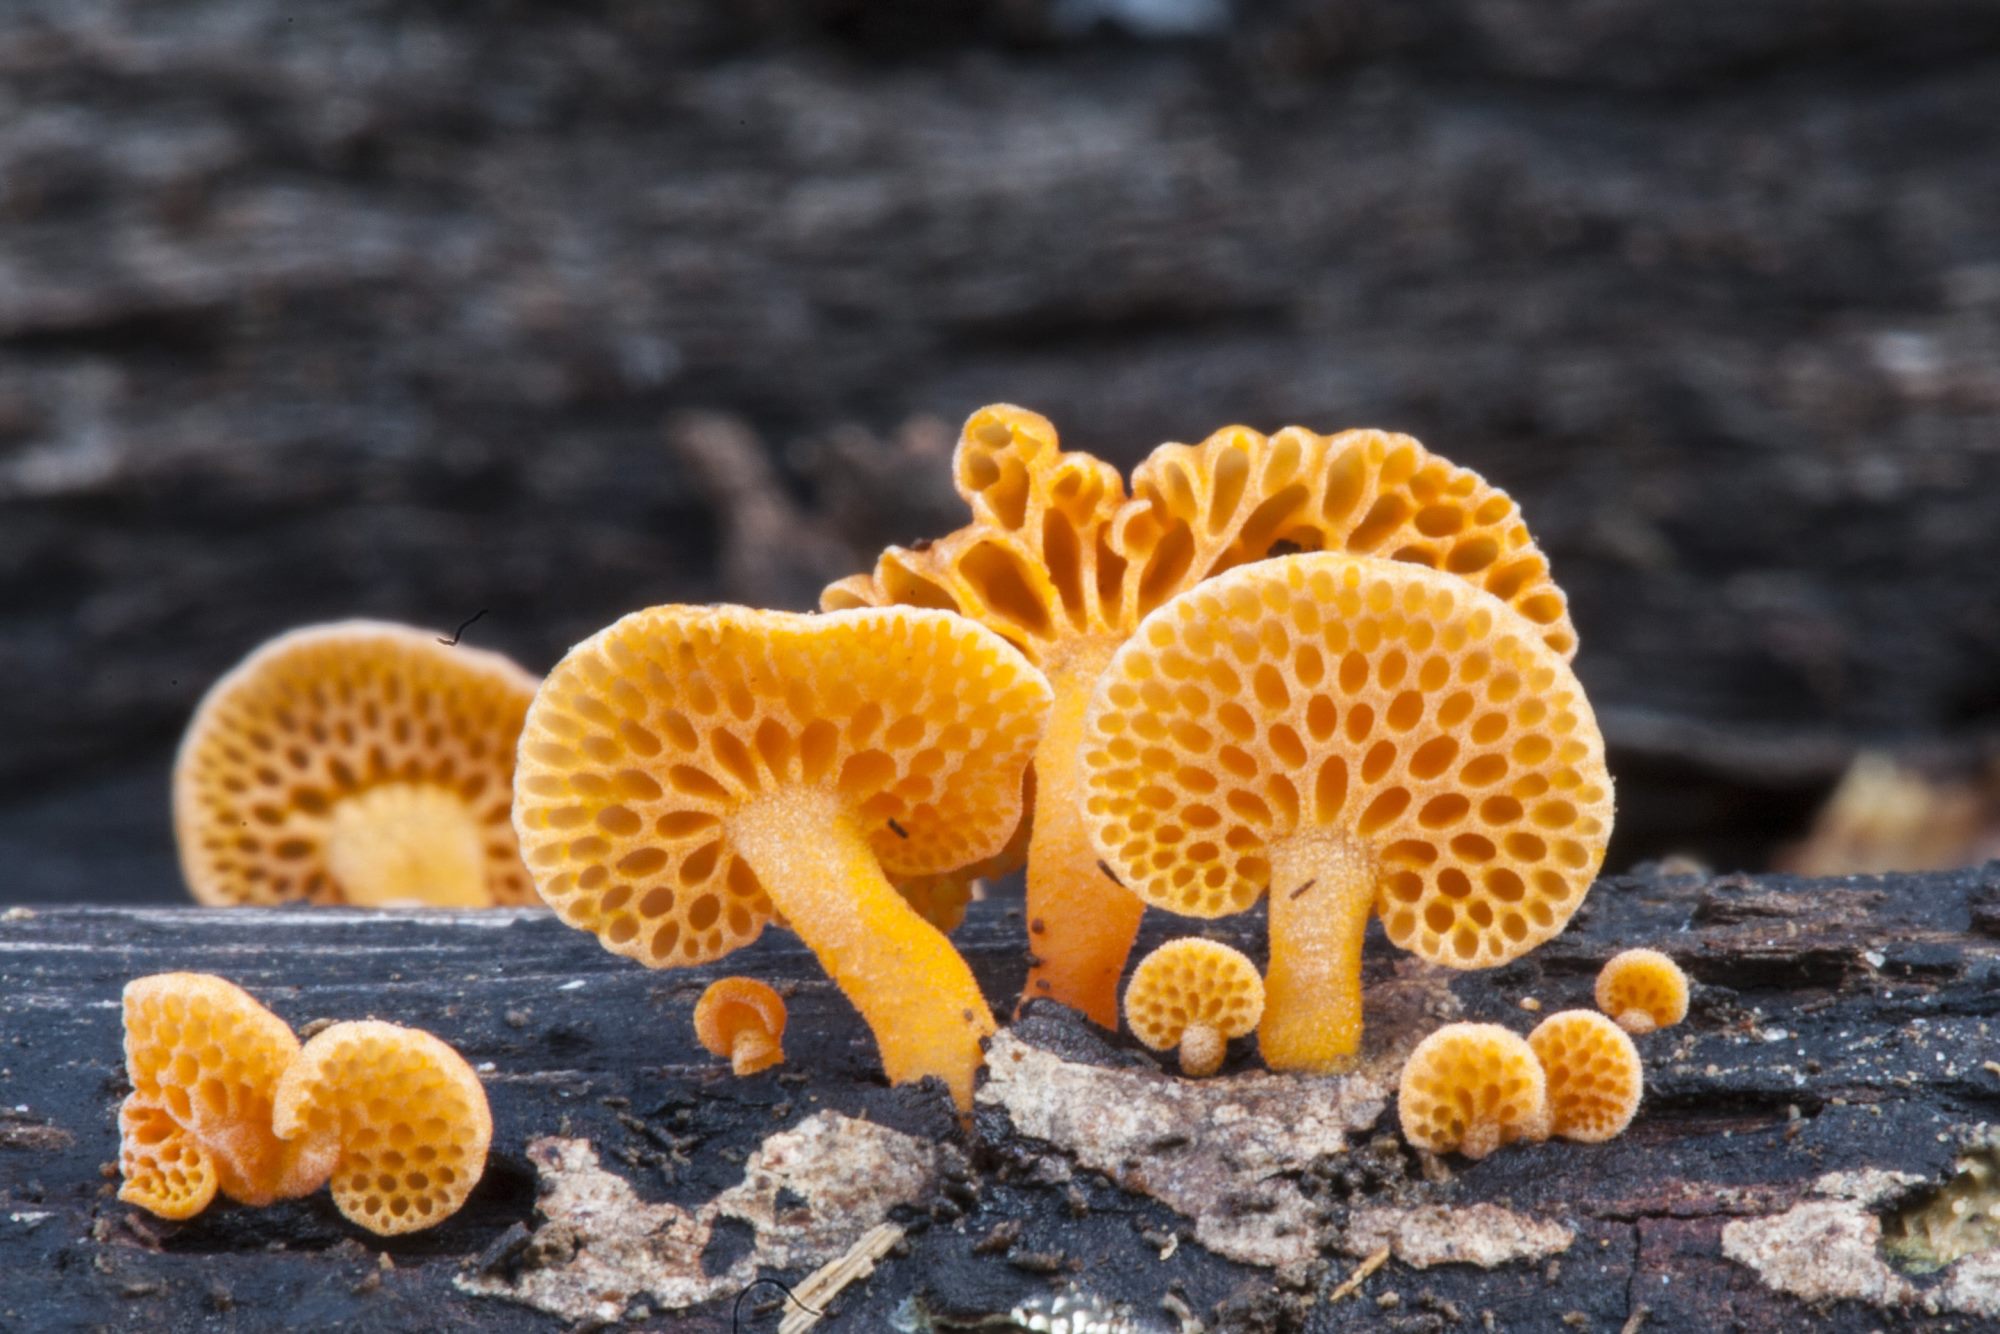 The orange pore fungus, Favolaschia calocera, is considered an invasive species in Australia. Although conspicuously coloured, they mostly go unnoticed and the consequence of their rapid colonisation are unknown.